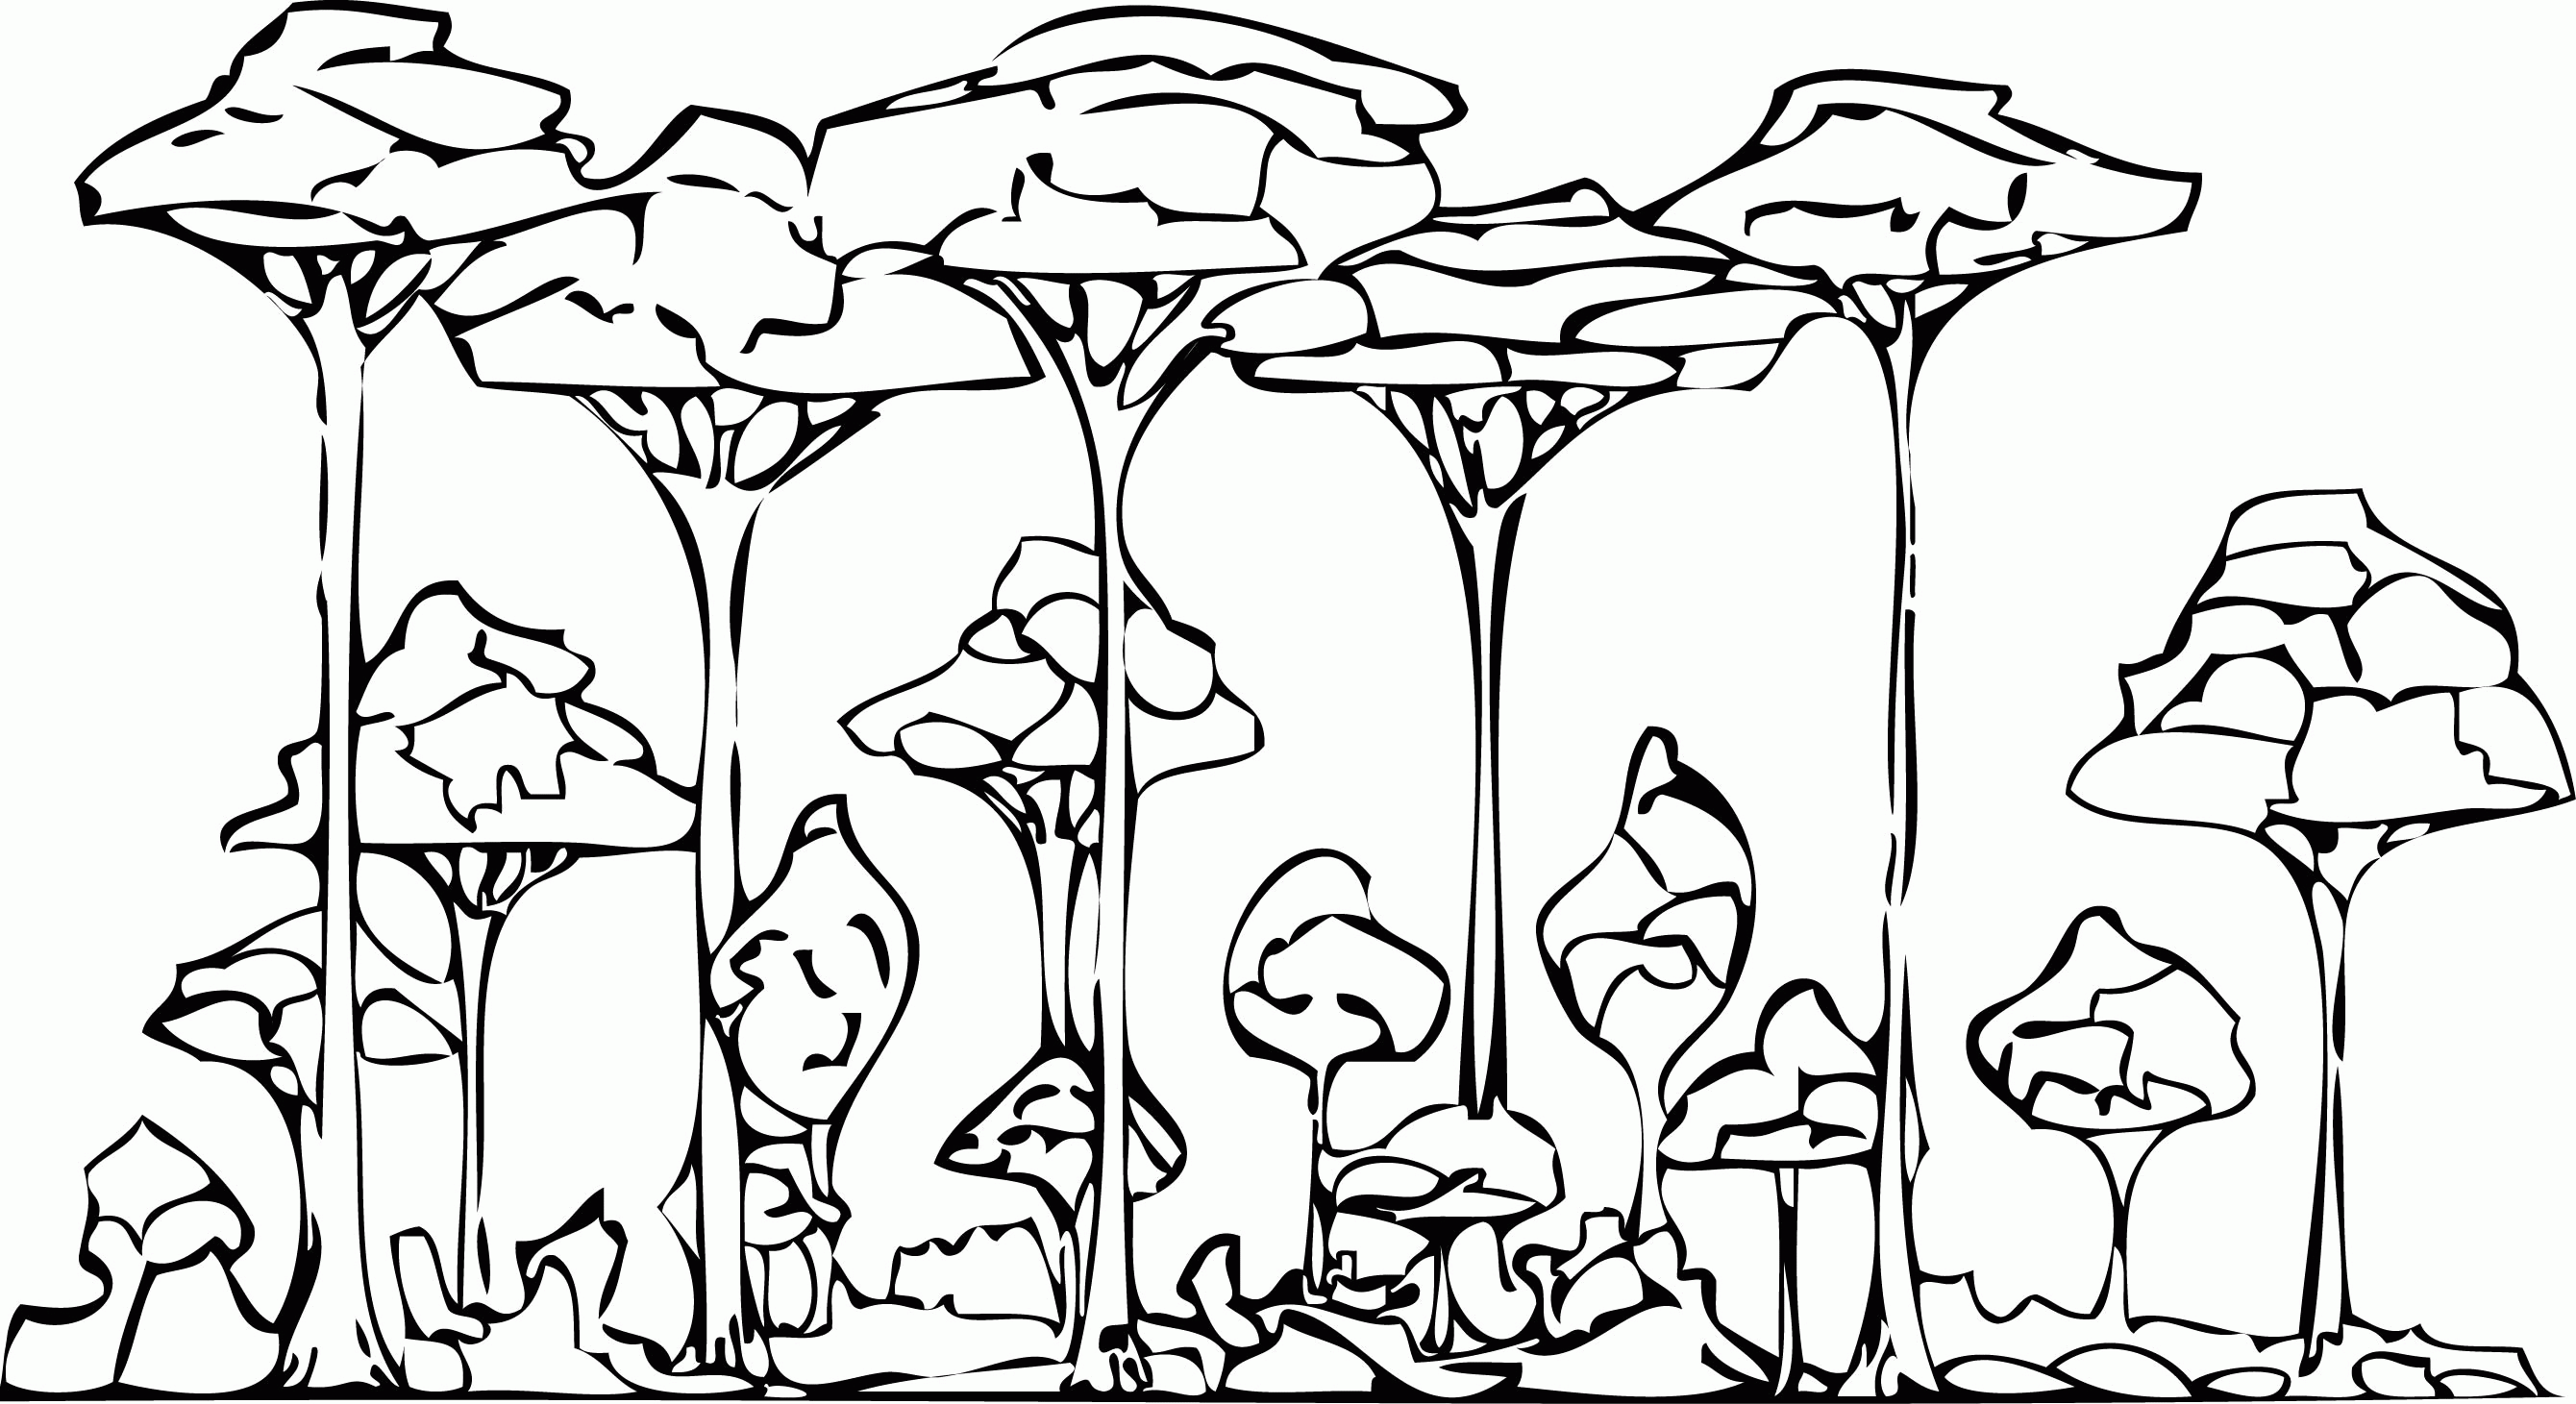 color the african rainforest. rainforest cute animals coloring ...